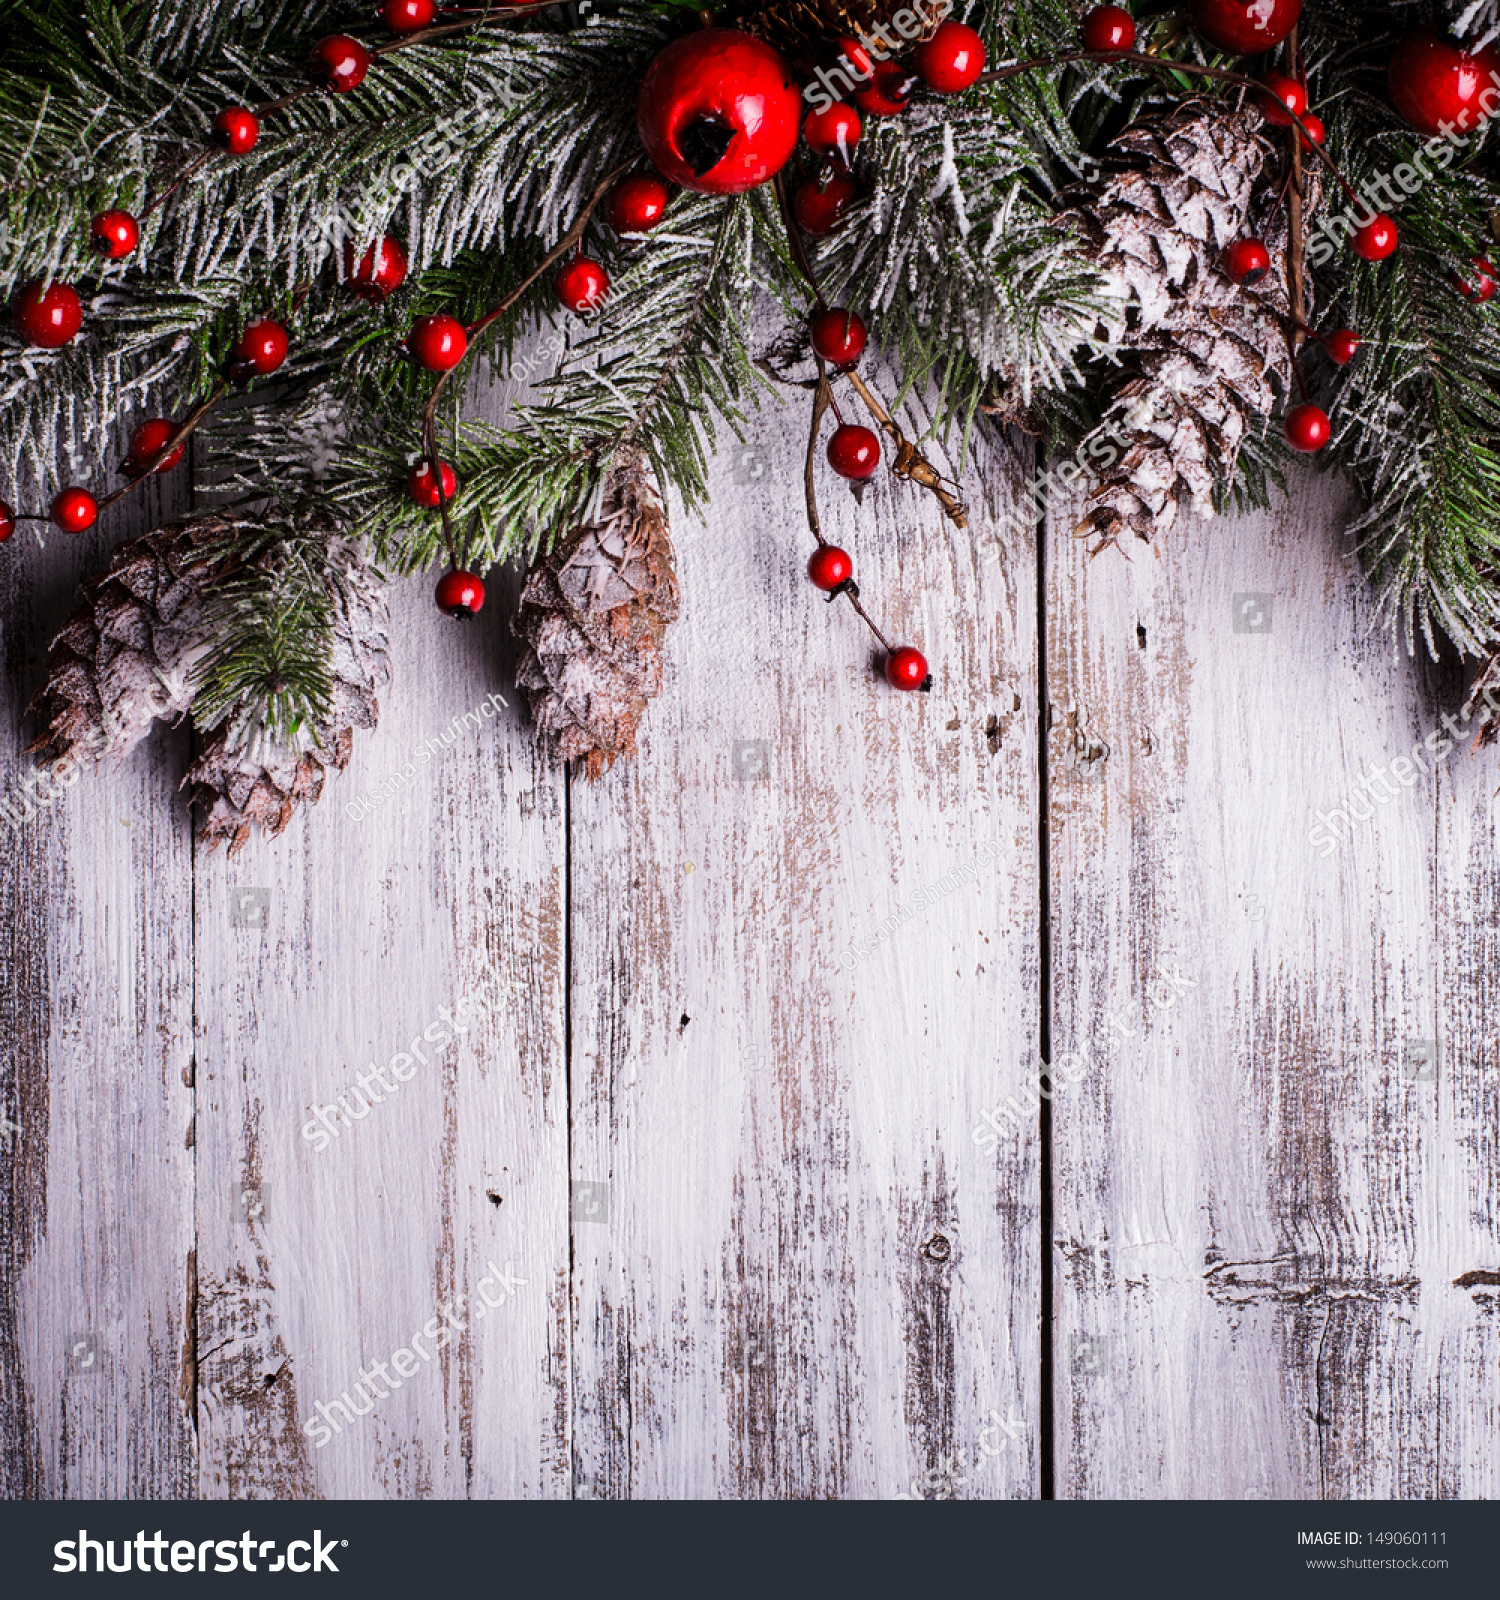 Christmas Border Design With Snow Covered Pinecones Stock Photo ...